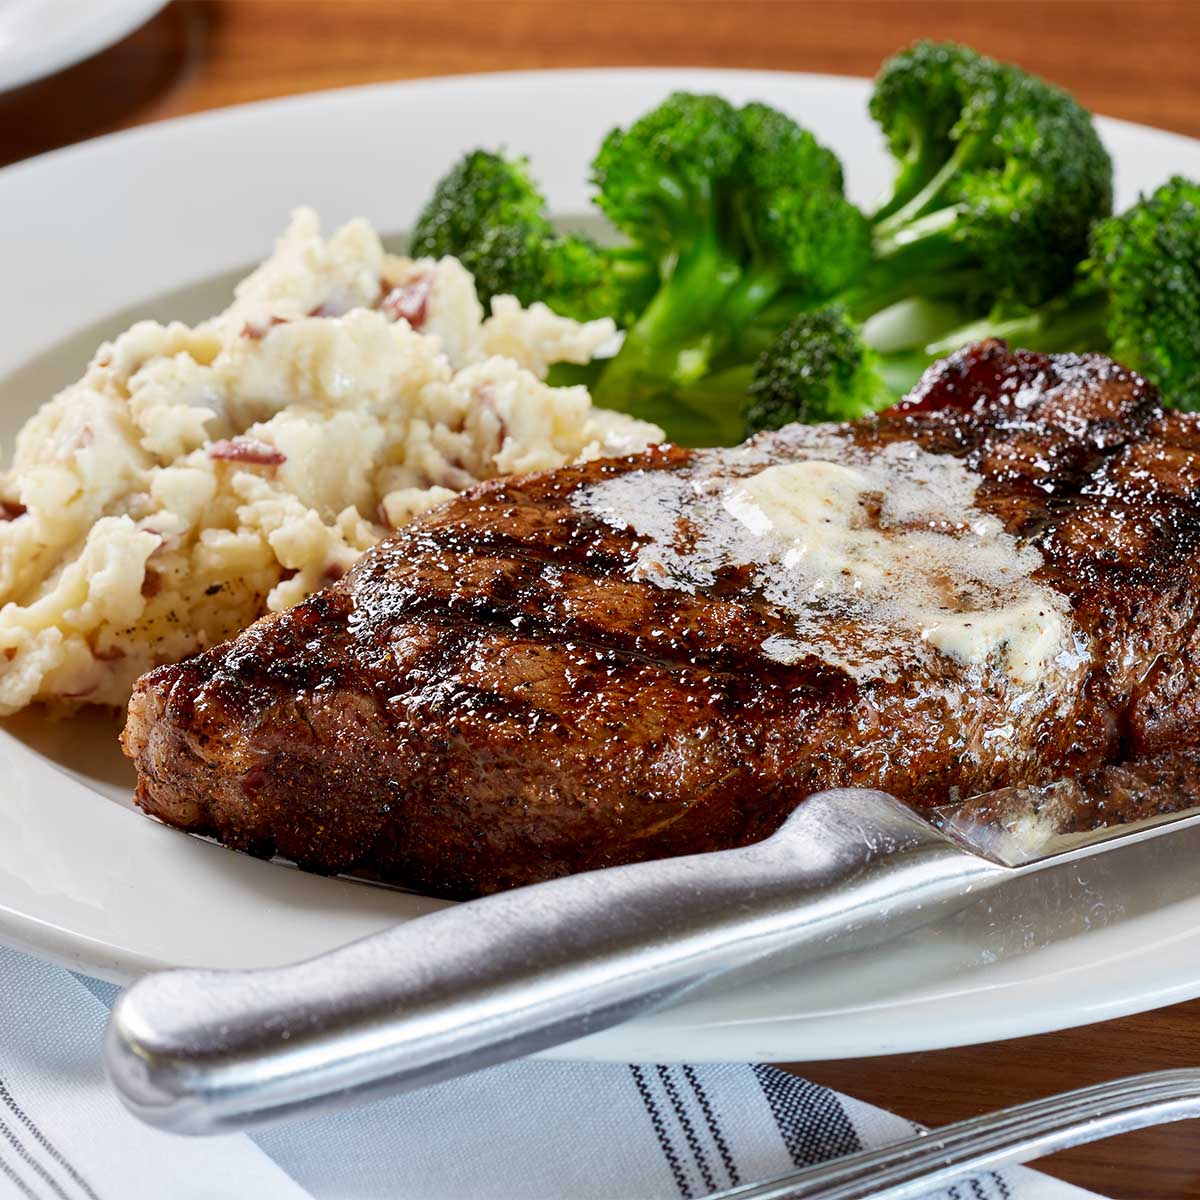 New York strip steak with mashed potatoes and broccoli at Burtons Boca Raton location